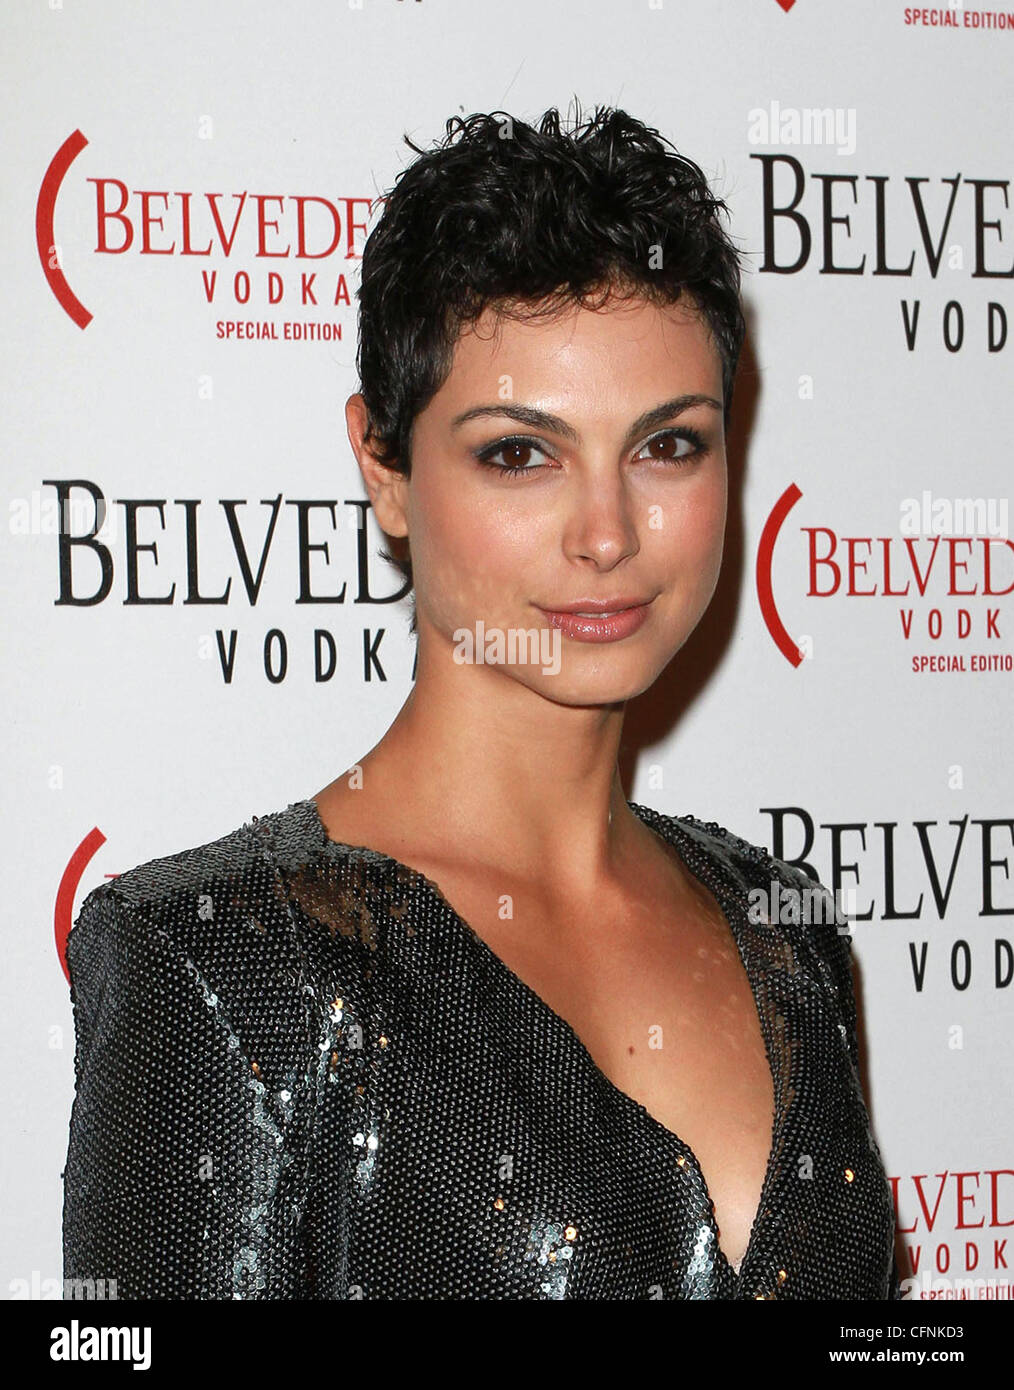 Morena Baccarin  Belvedere Vodka Launch Party For (RED) Special Edition Bottle  Held At Avalon  Hollywood, California - 10.02.11 Stock Photo